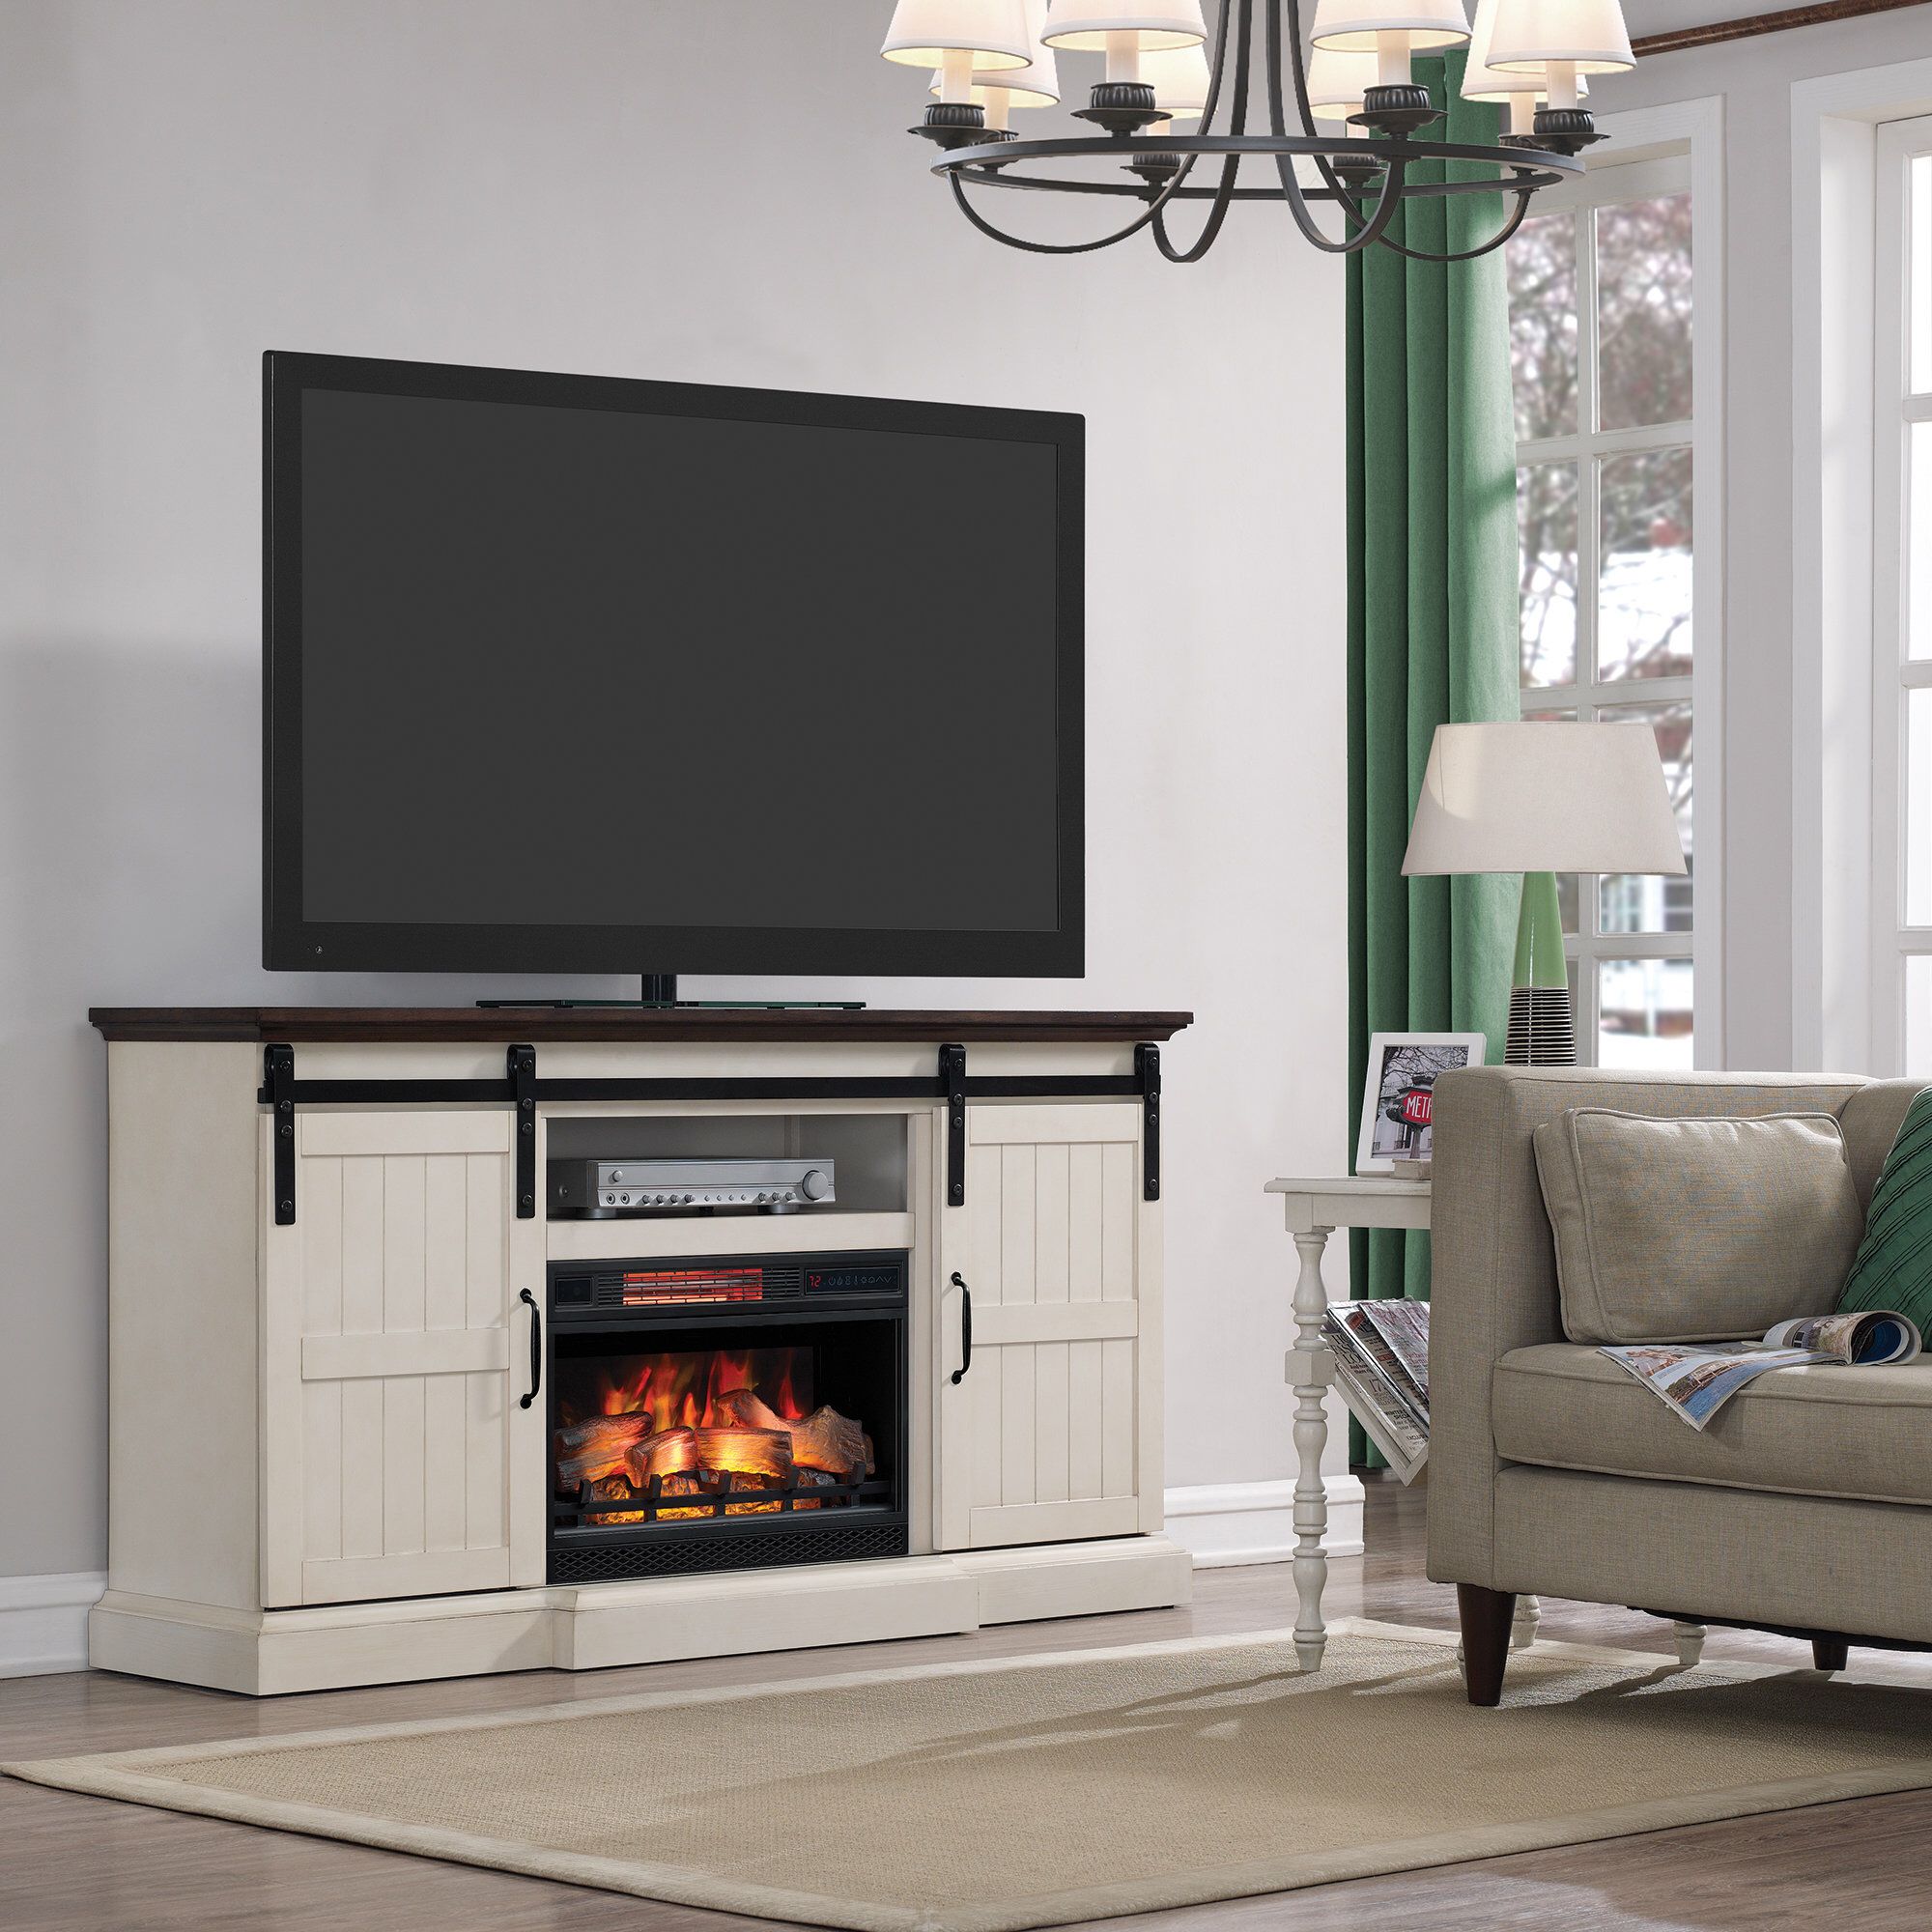 Infrared Fireplace Heater Tv Stand Best Of Glendora 66 5" Tv Stand with Electric Fireplace